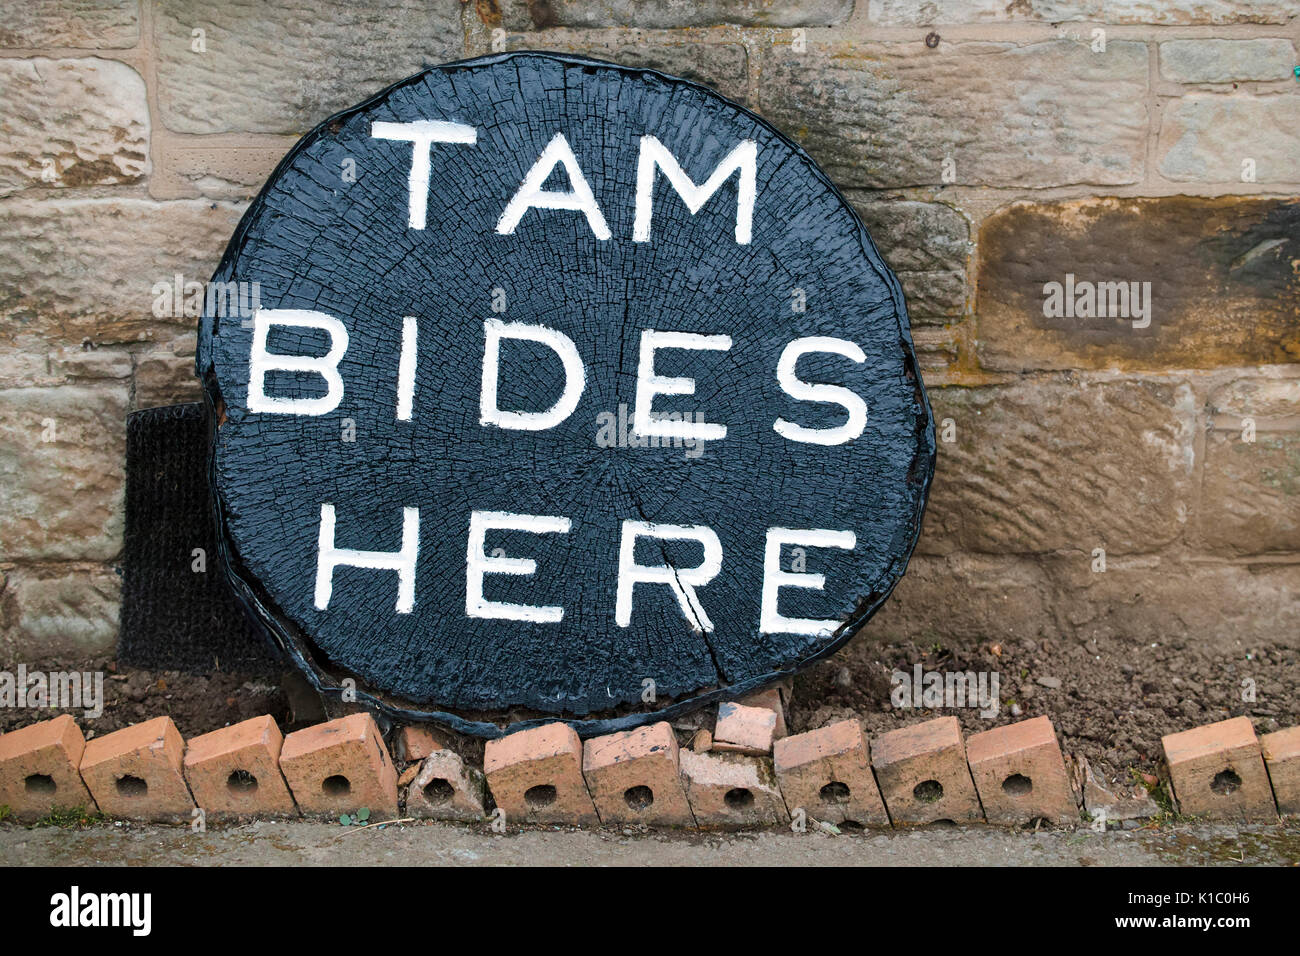 Scotland - a cottage in East Lothian has this sign, Tam (Thomas) Bides (lives or stays) Here. Stock Photo